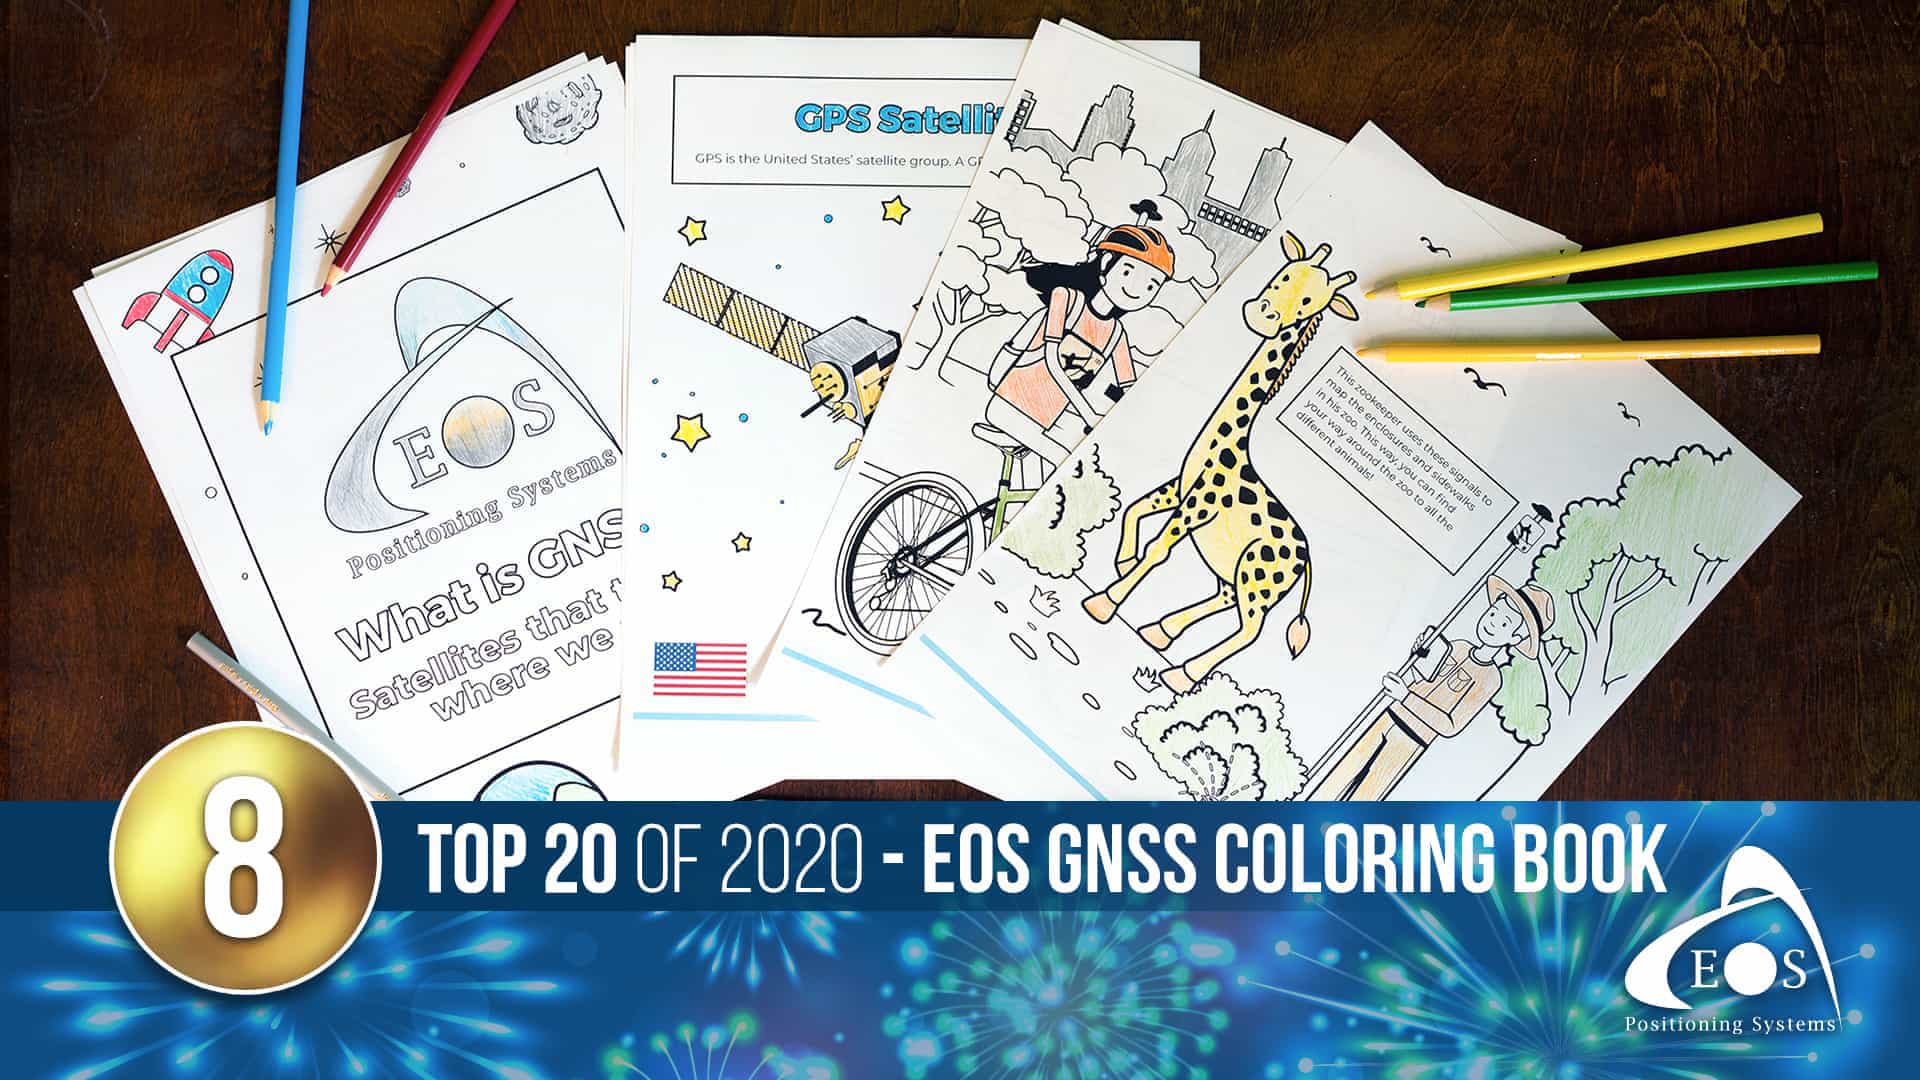 Eos Positioning Systems blog top articles of 2020: GNSS Coloring book